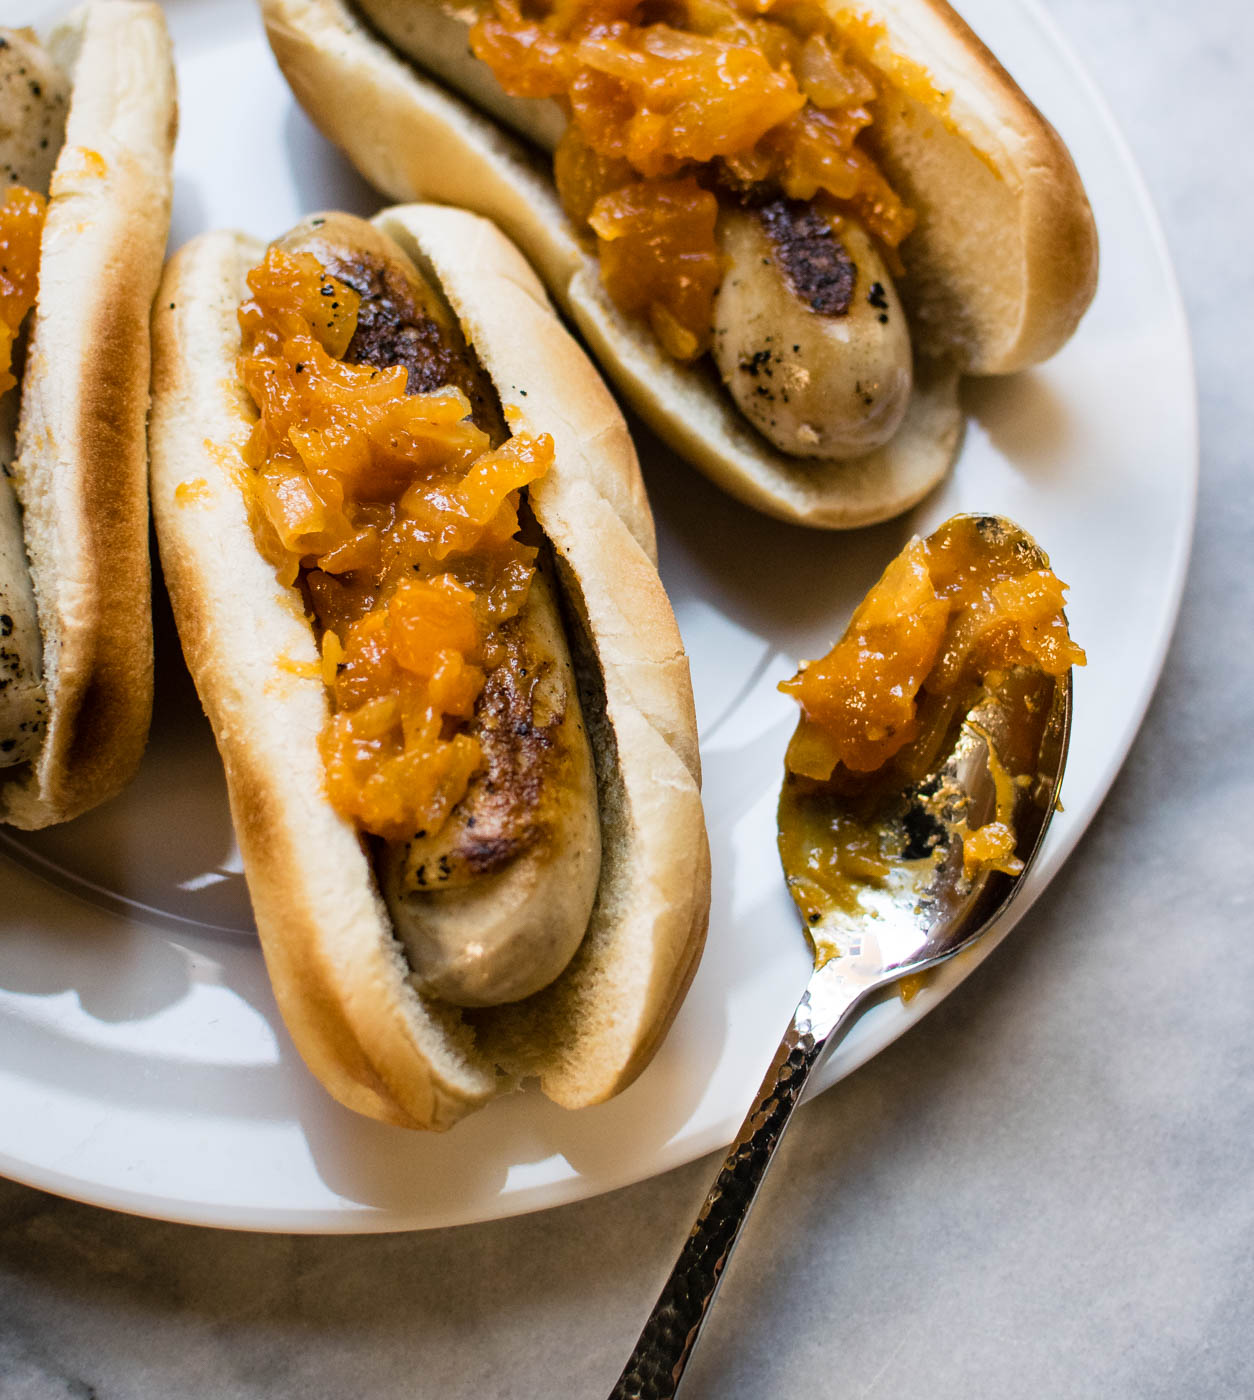 Spice up game day: Chicken sliders, Caribbean-style hot dogs